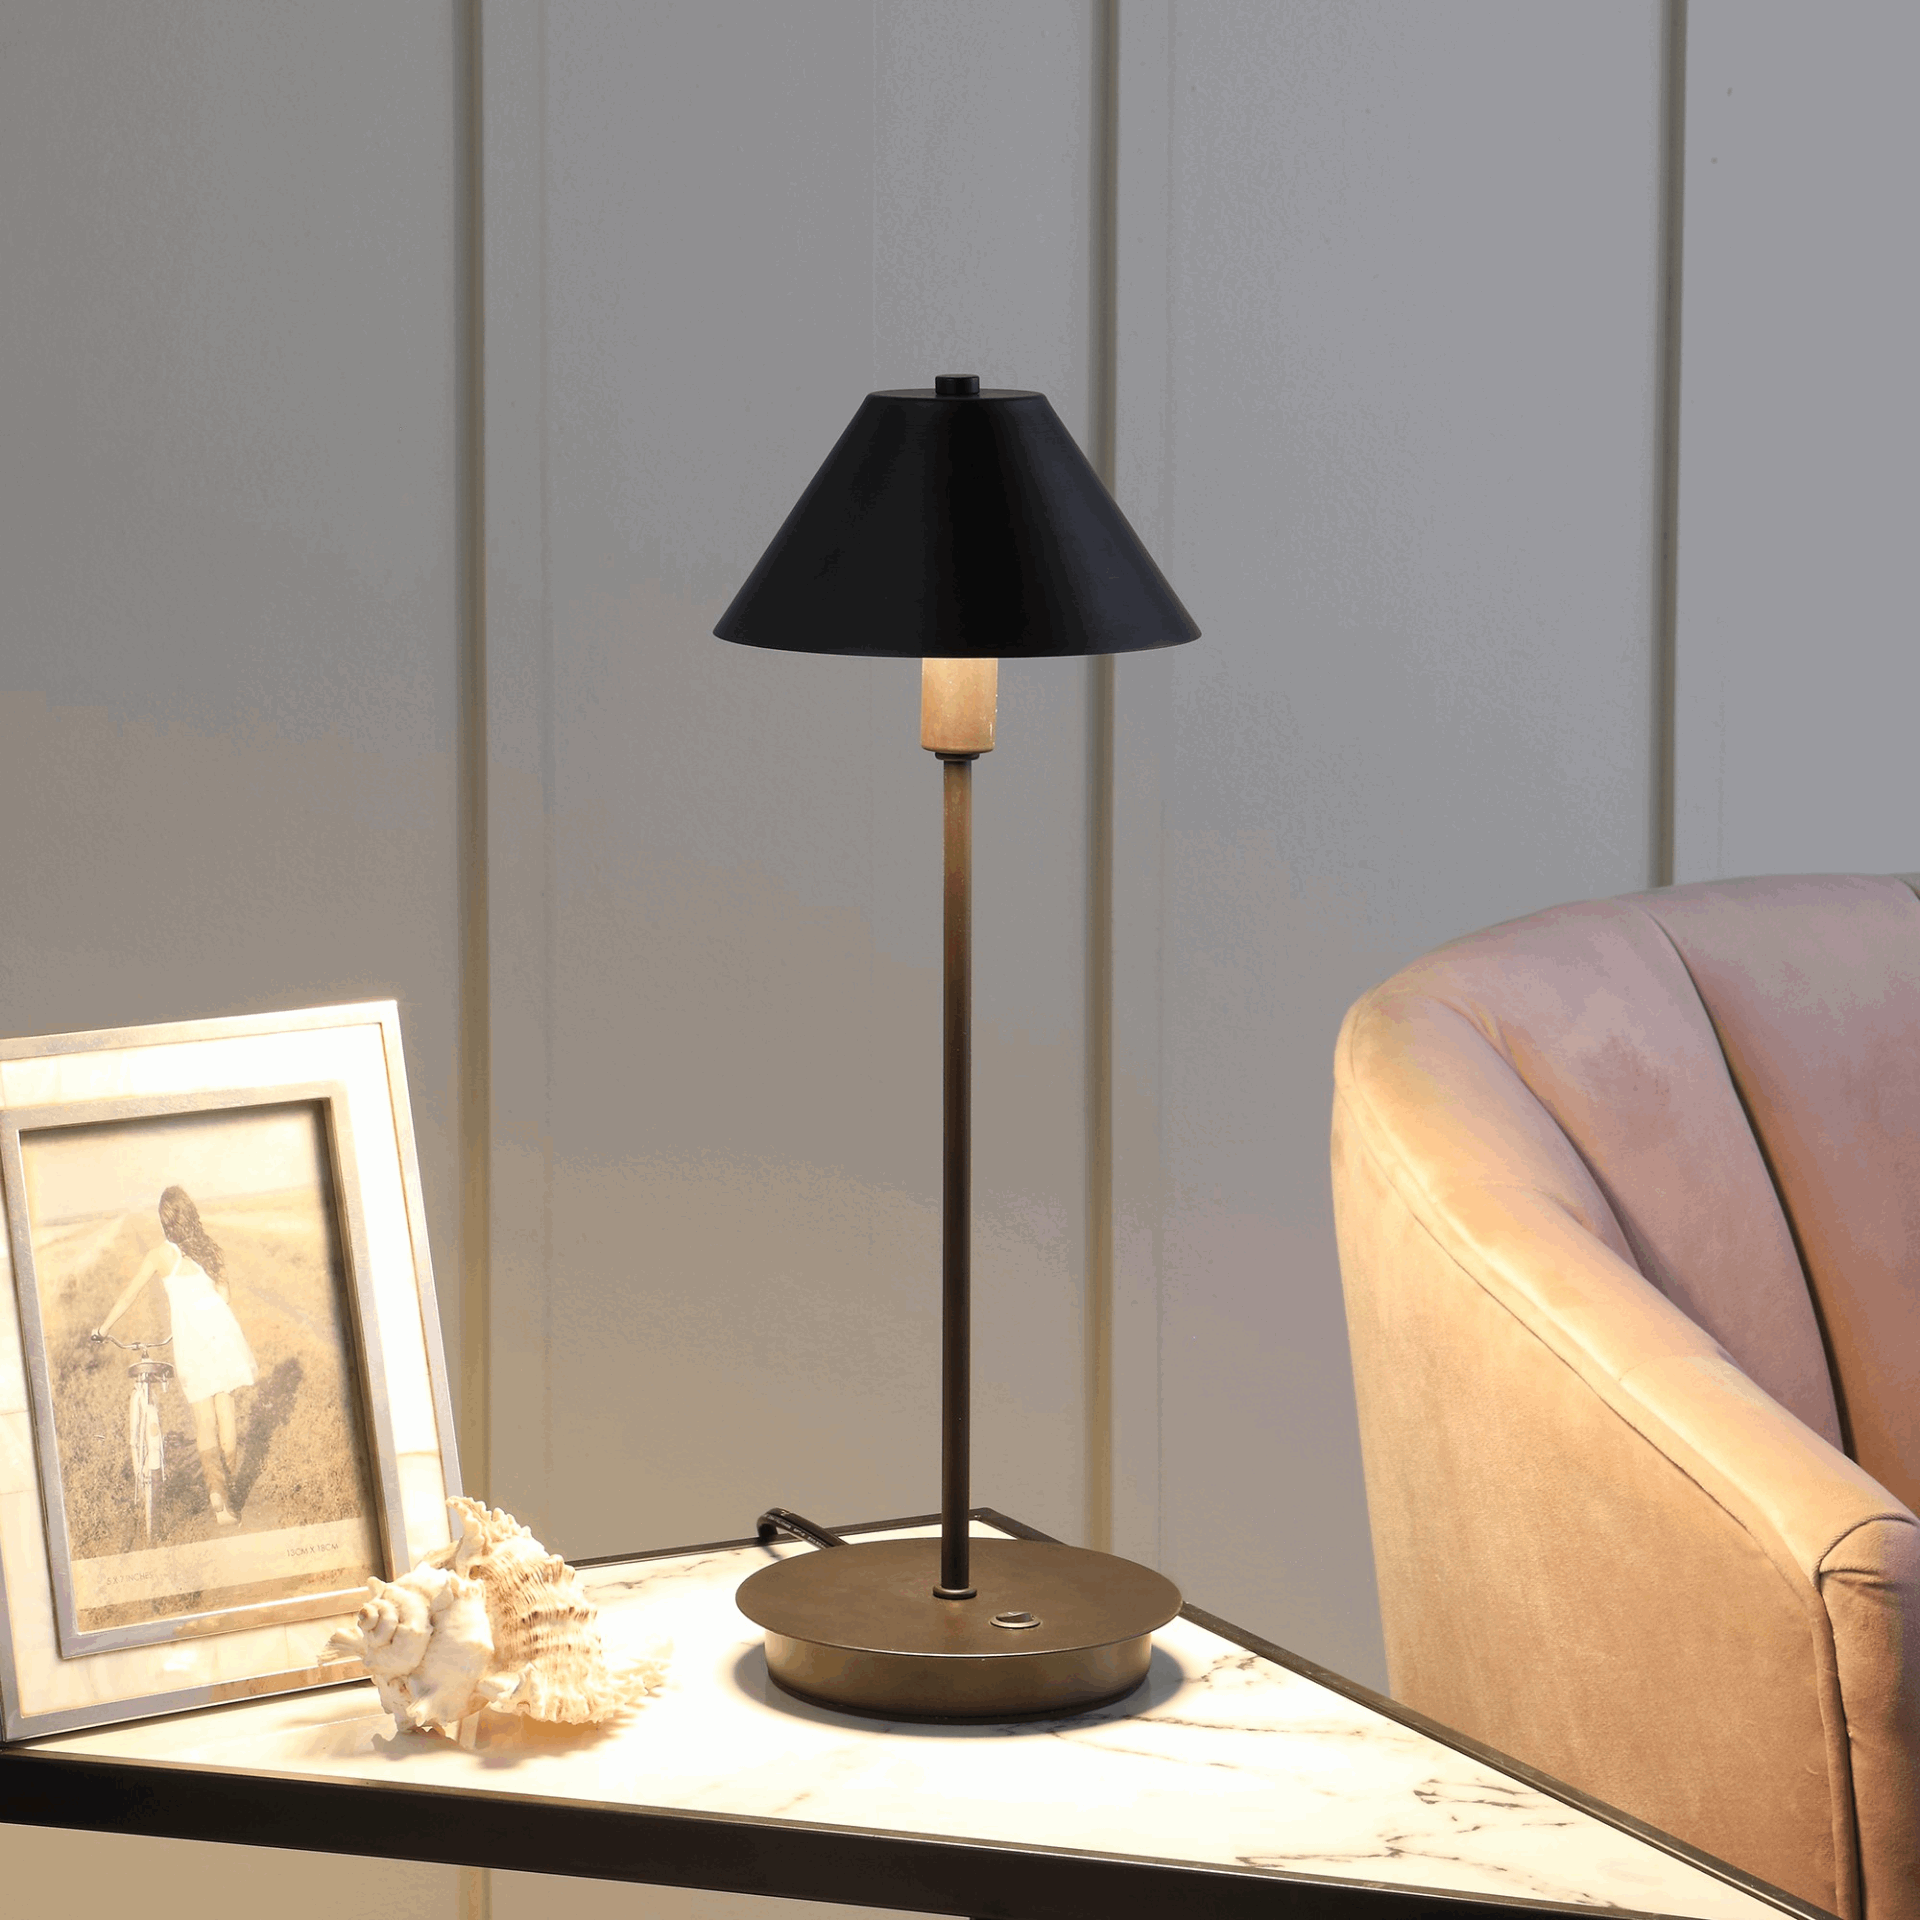 "18"" Black Metal Bedside Table Lamp With Black Cone Shade"